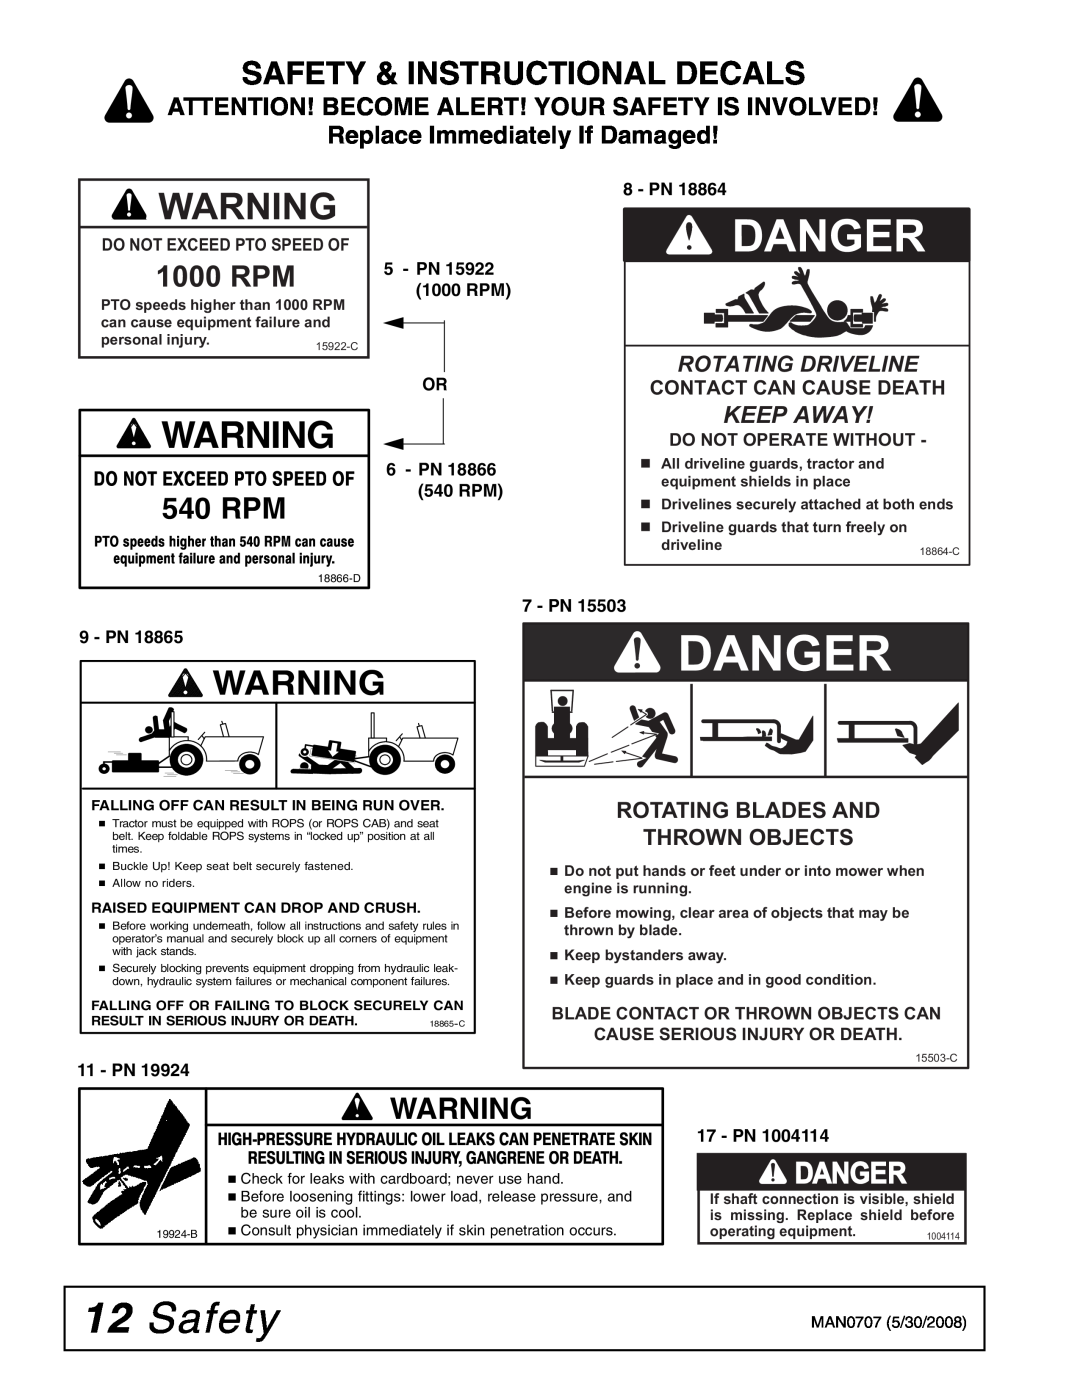 Woods Equipment BW180Q-3 Danger, Safety & Instructional Decals, 1000 RPM, Replace Immediately If Damaged, Keep Away 